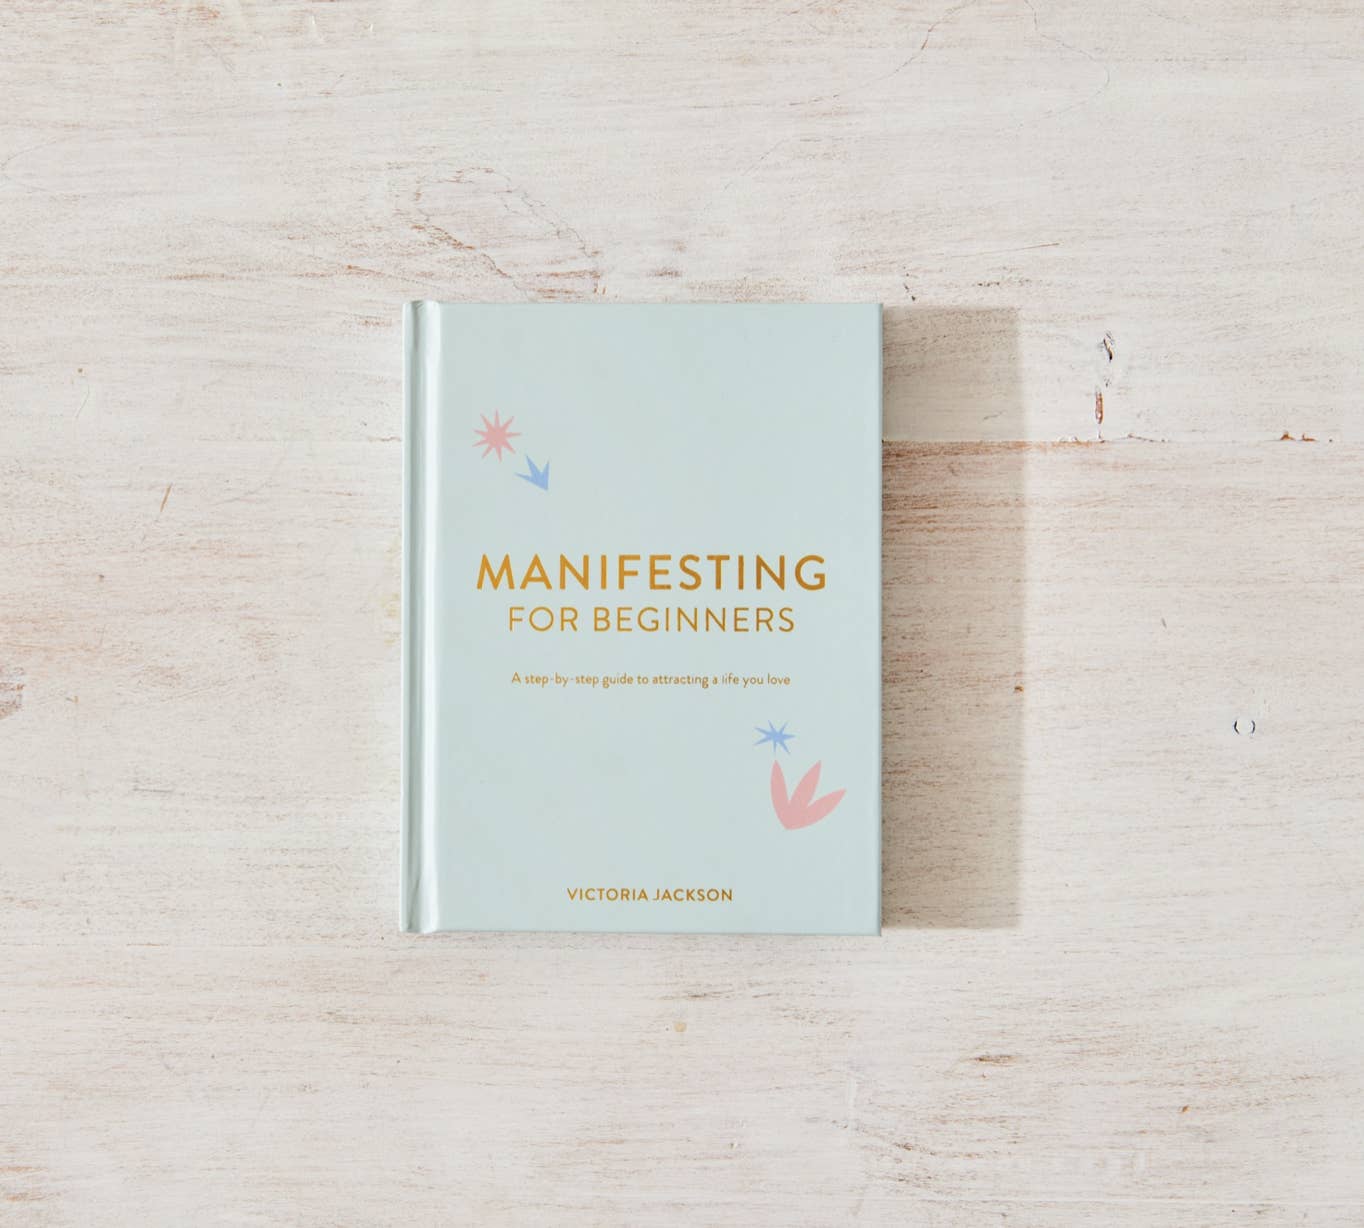 Manifesting For Beginners by Victoria Jackson